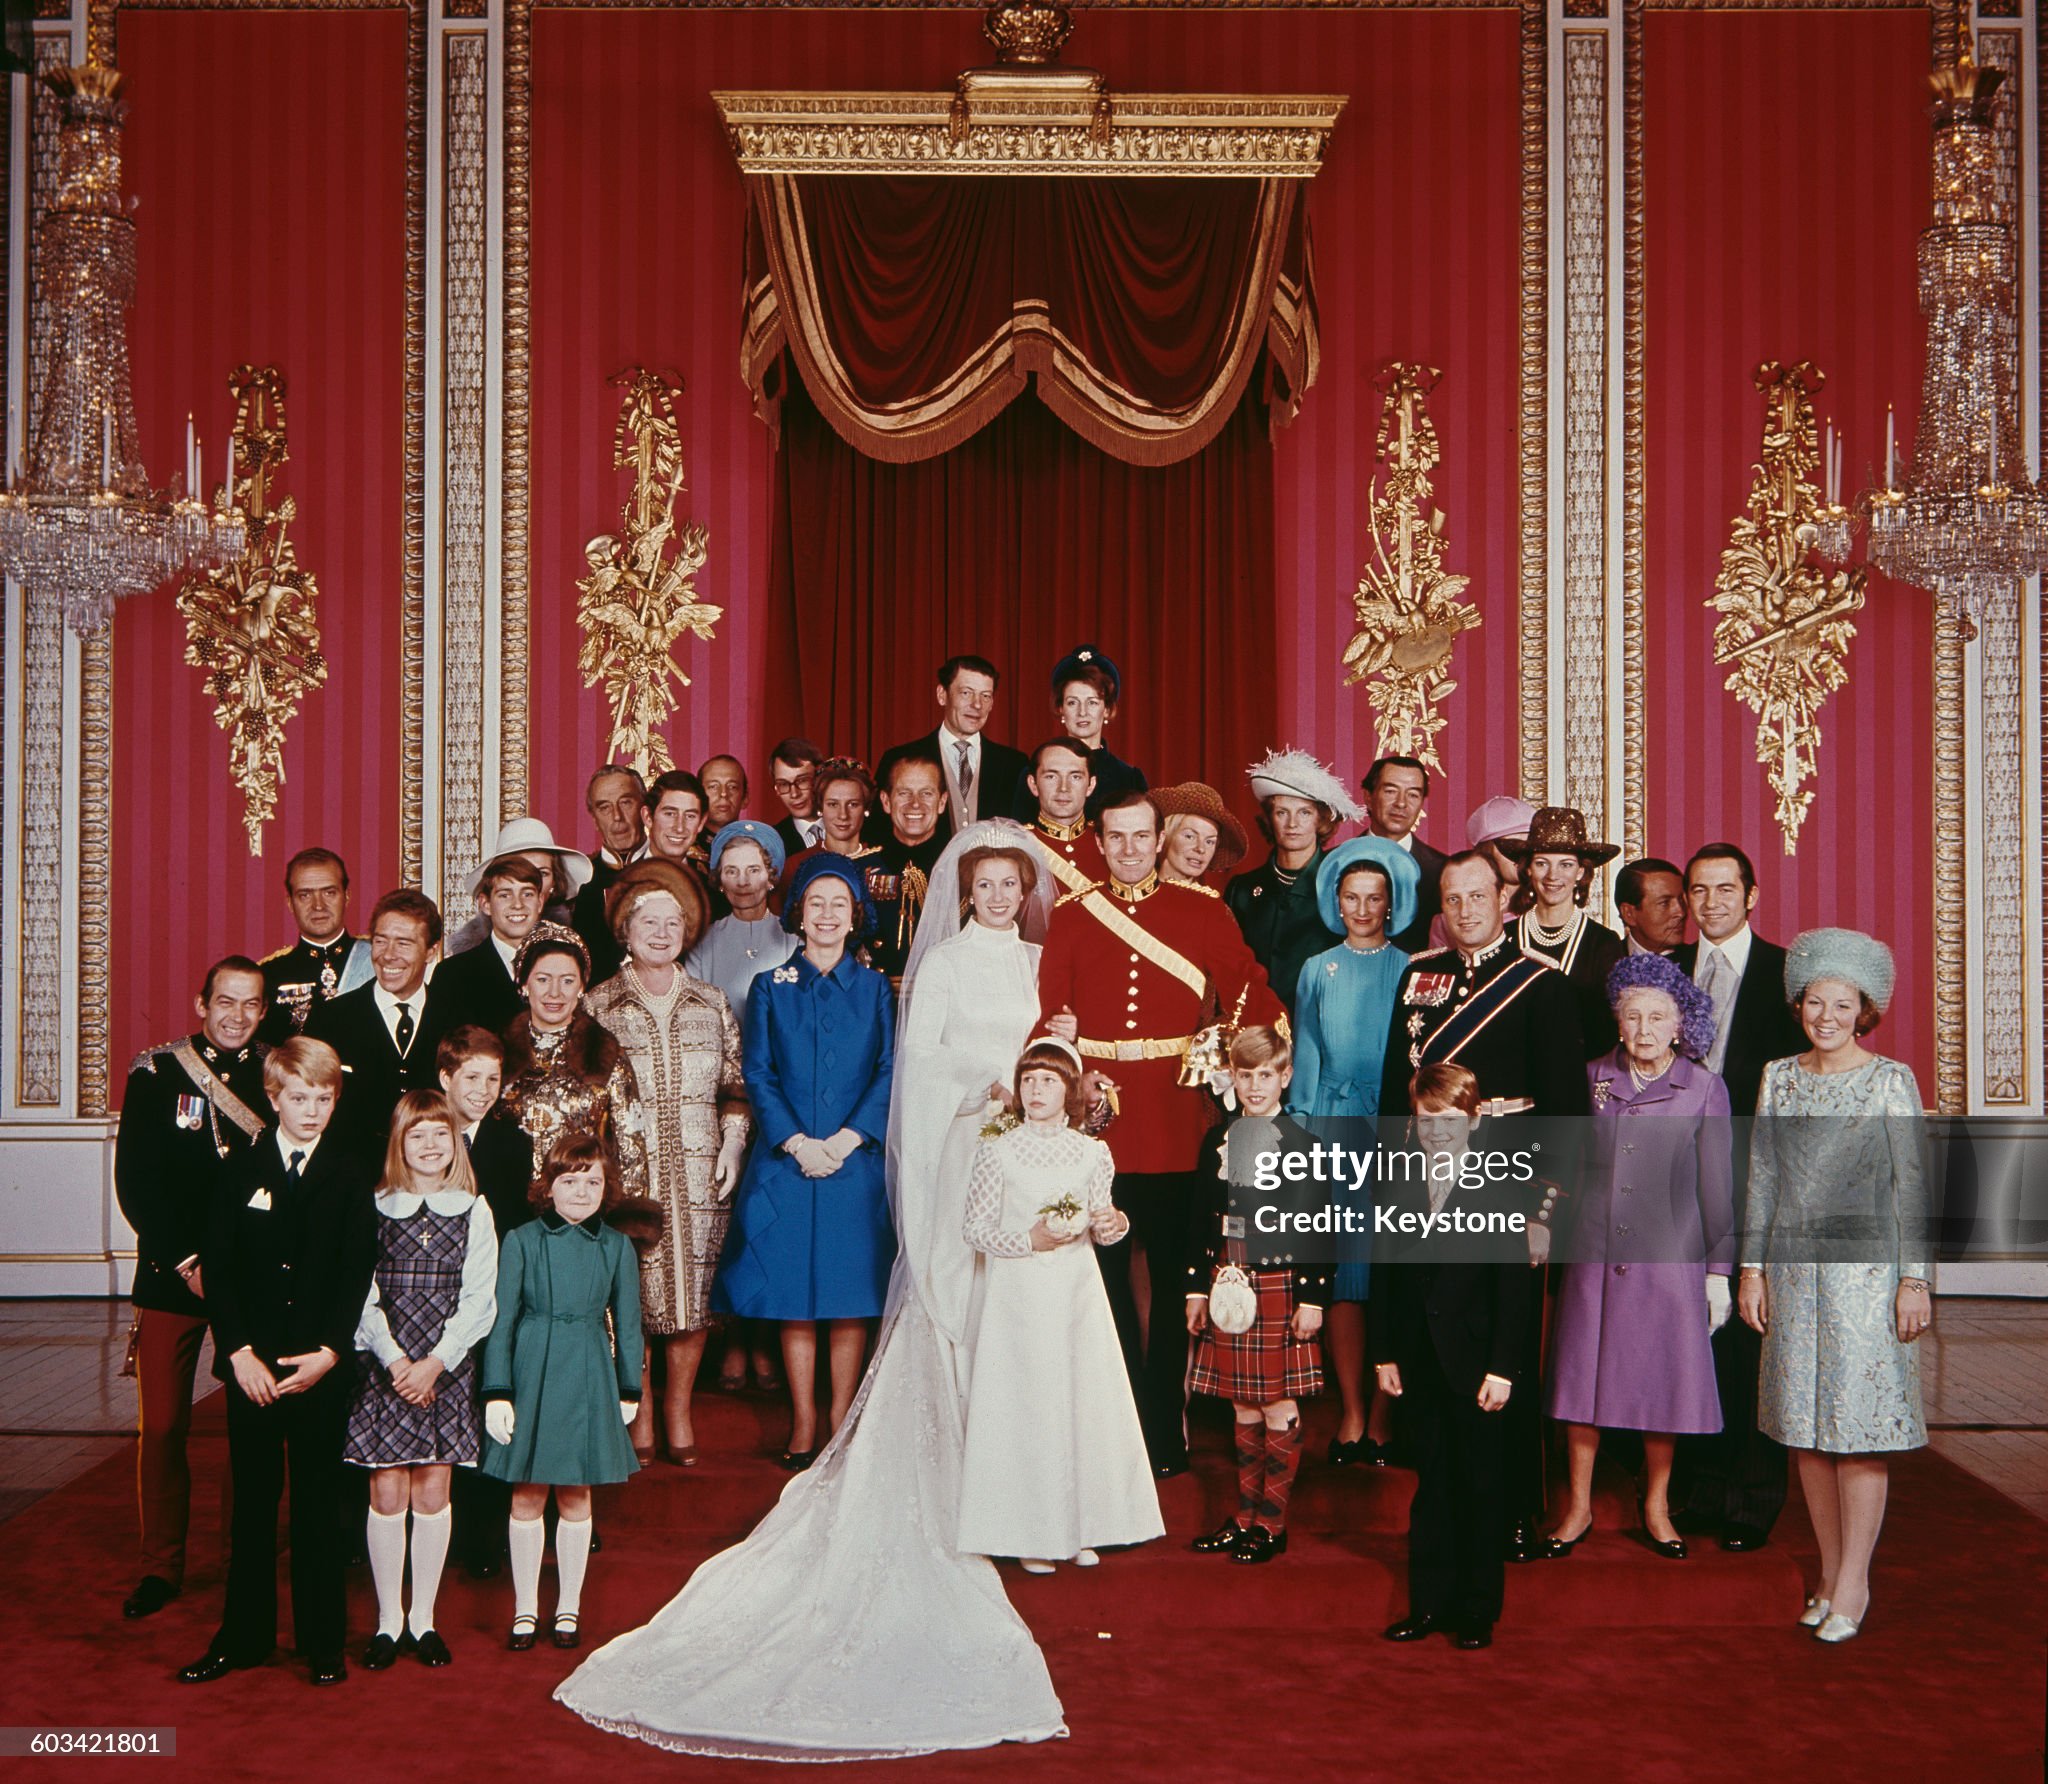 the-wedding-of-anne-princess-royal-to-mark-phillips-london-uk-14th-november-1973-also-pictured.jpg